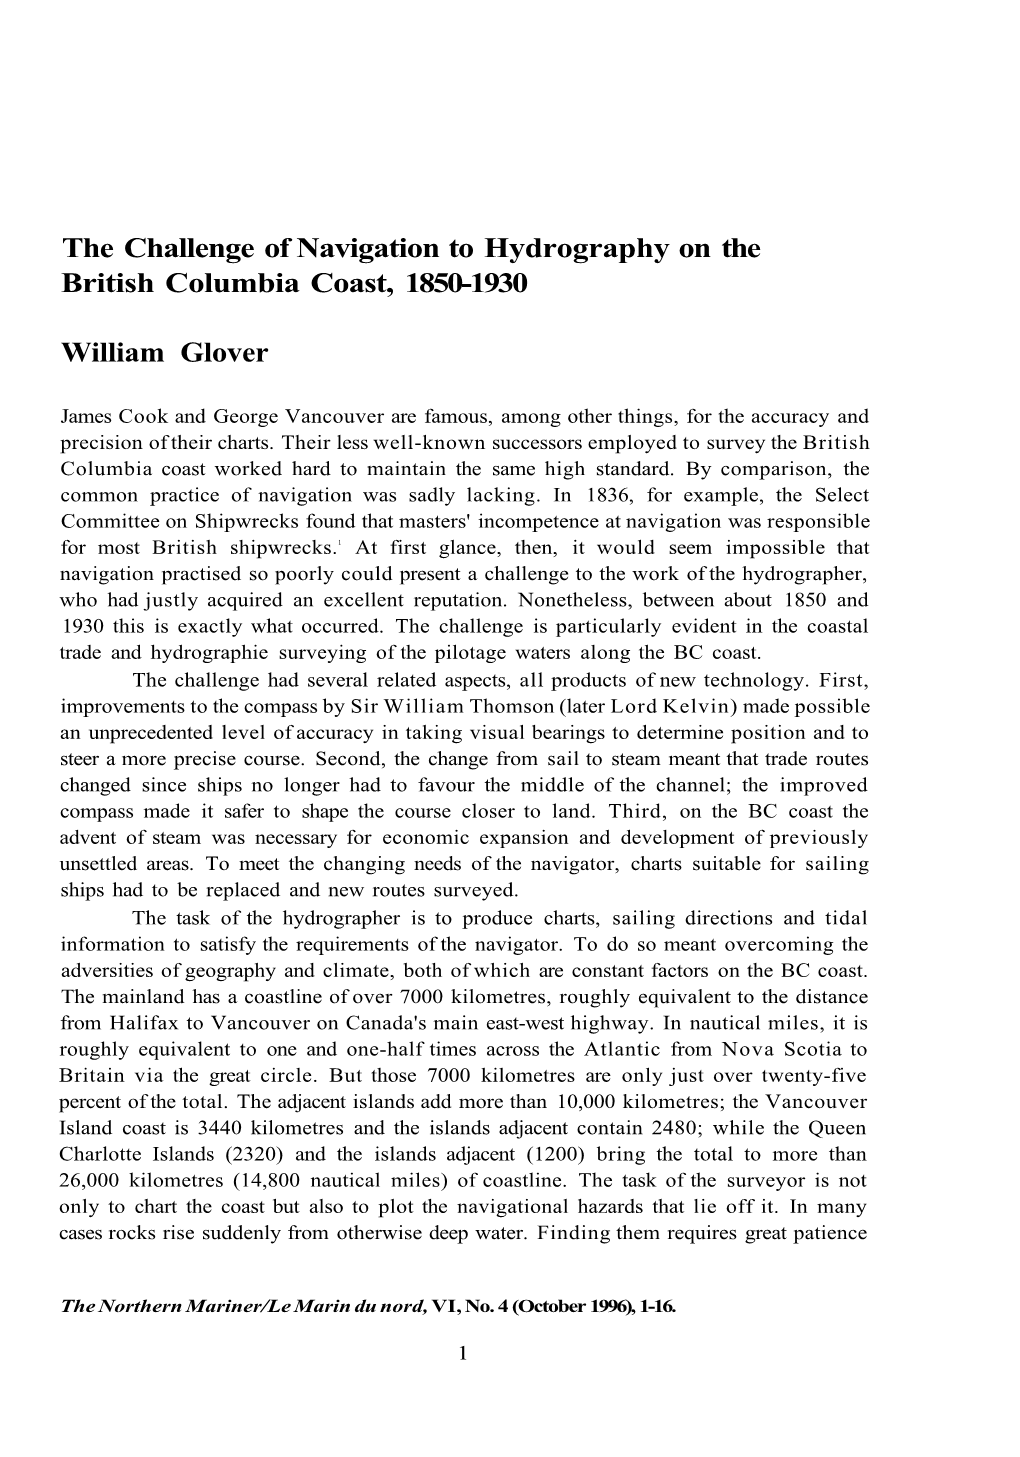 The Challenge of Navigation to Hydrography on the British Columbia Coast, 1850-1930